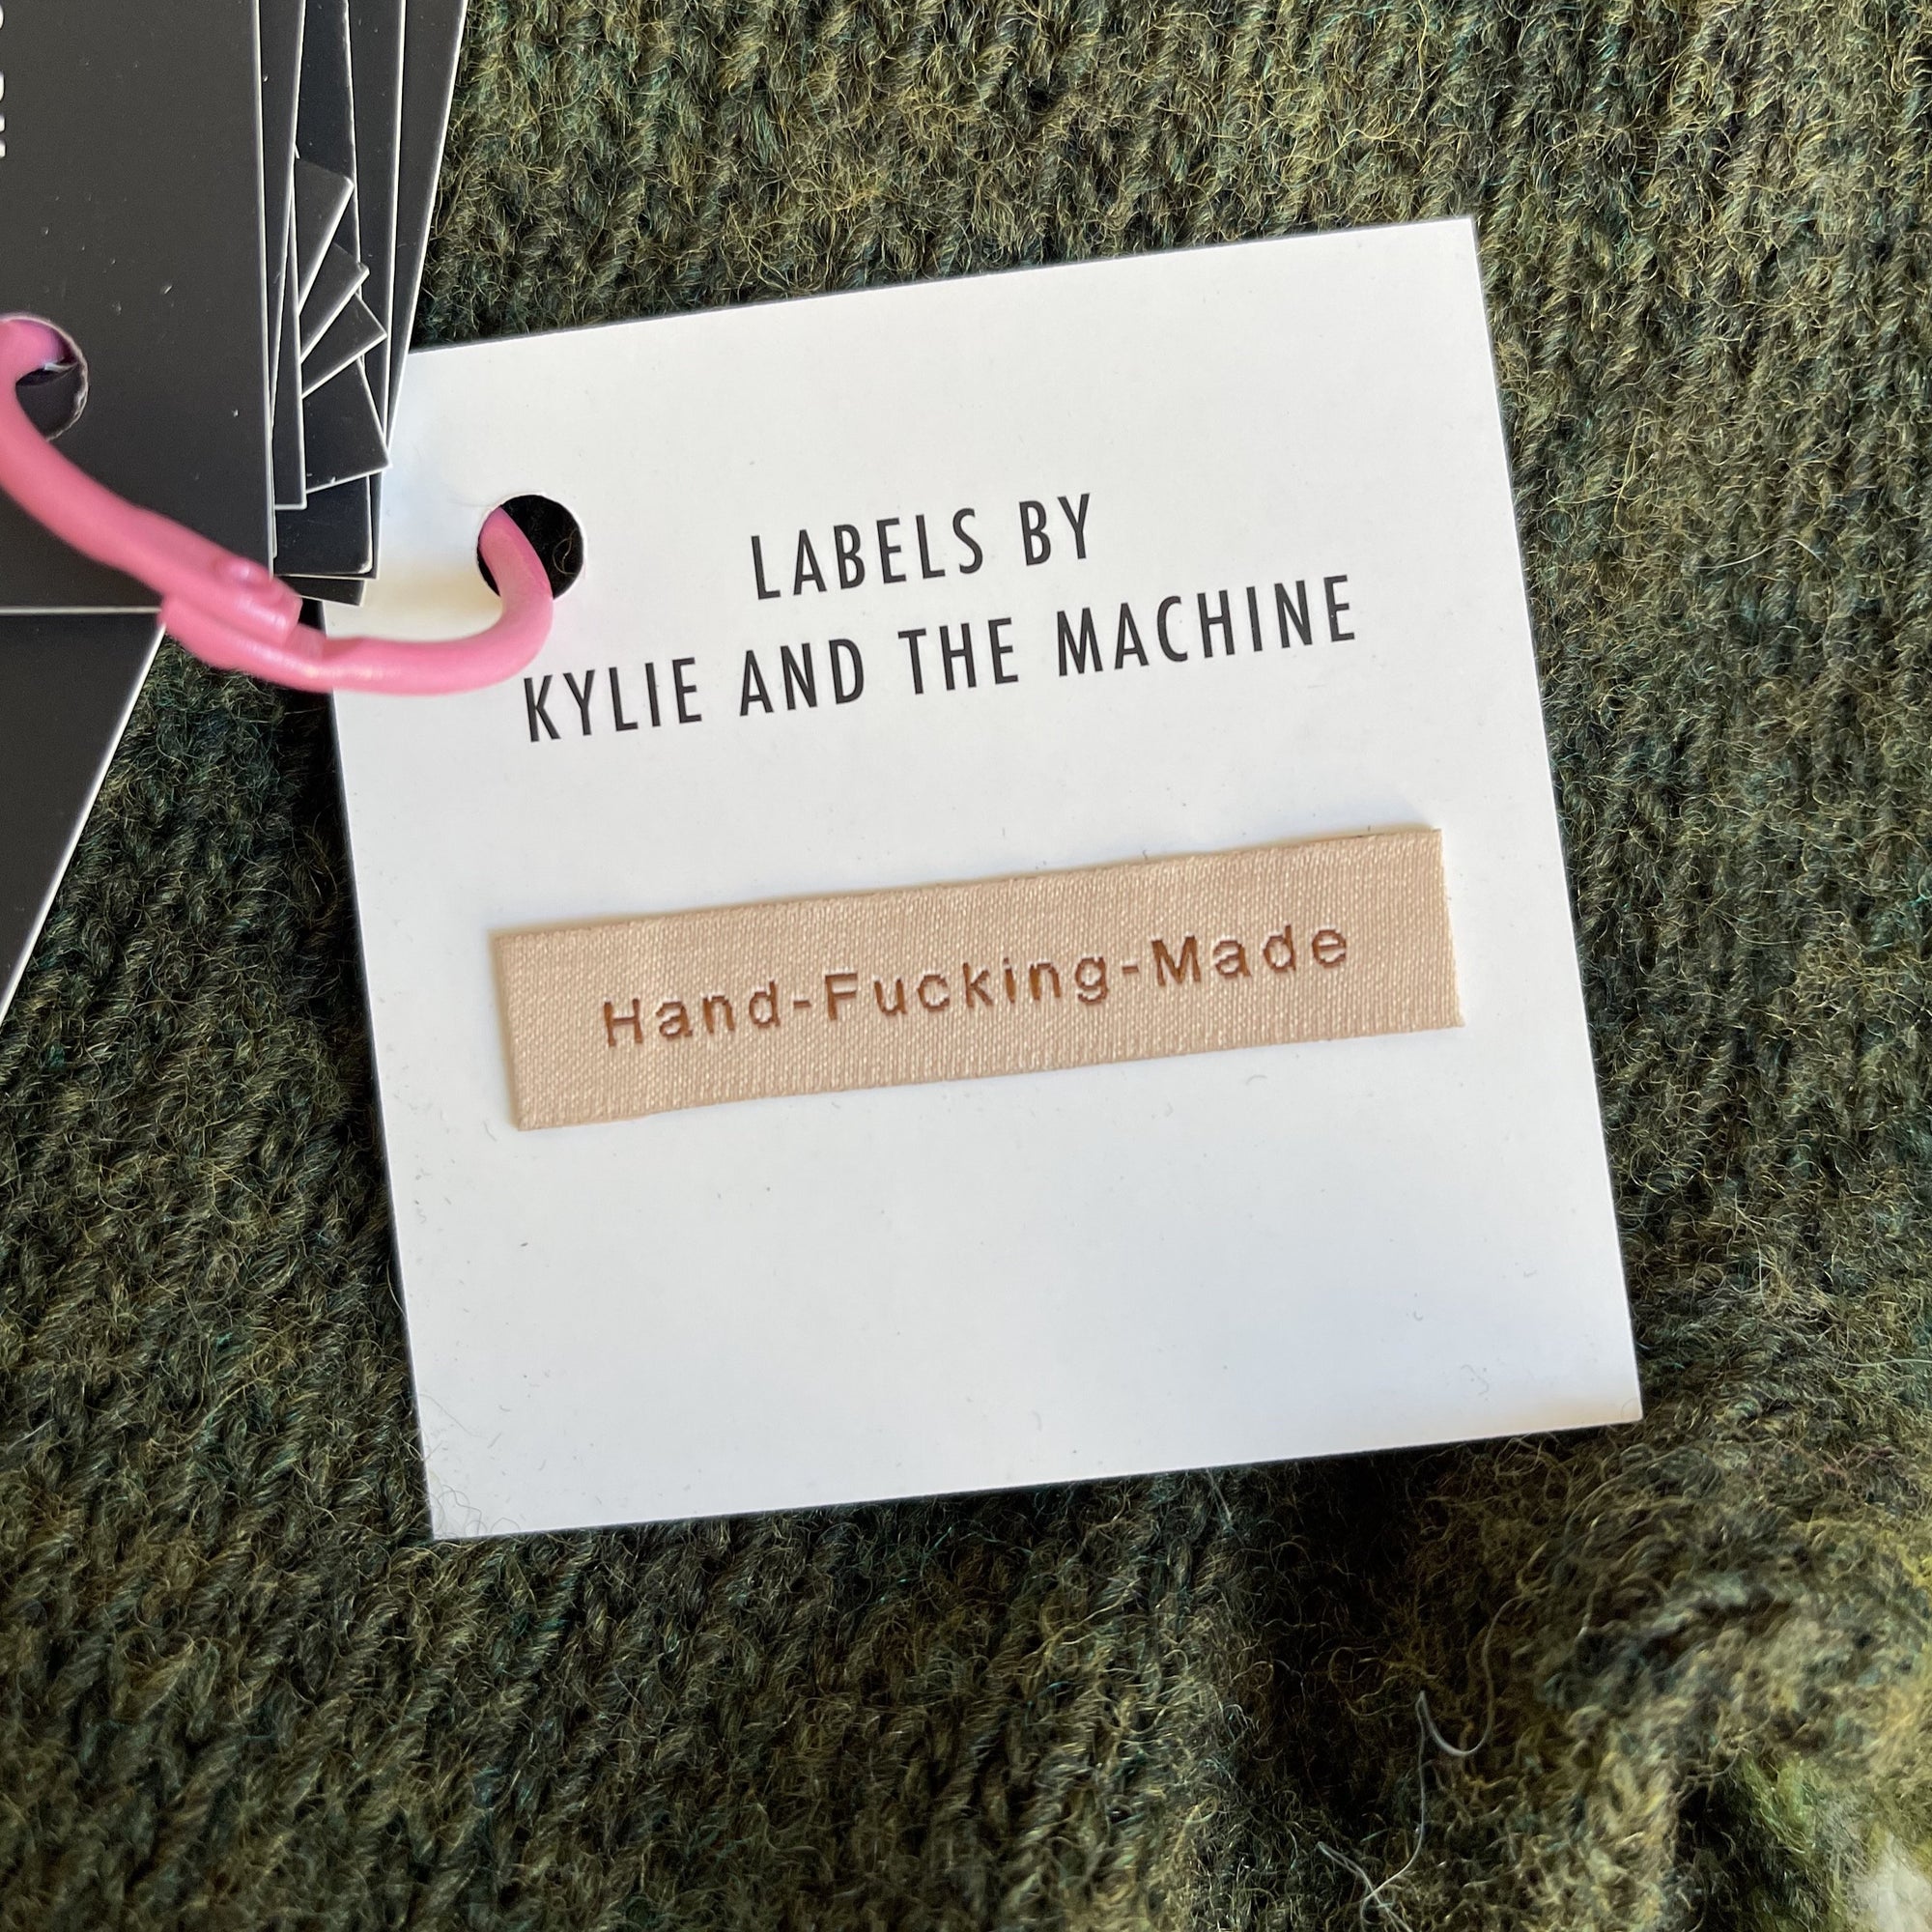 "Hand-Fucking Made" Woven Labels 10 Pack Kylie and the Machine